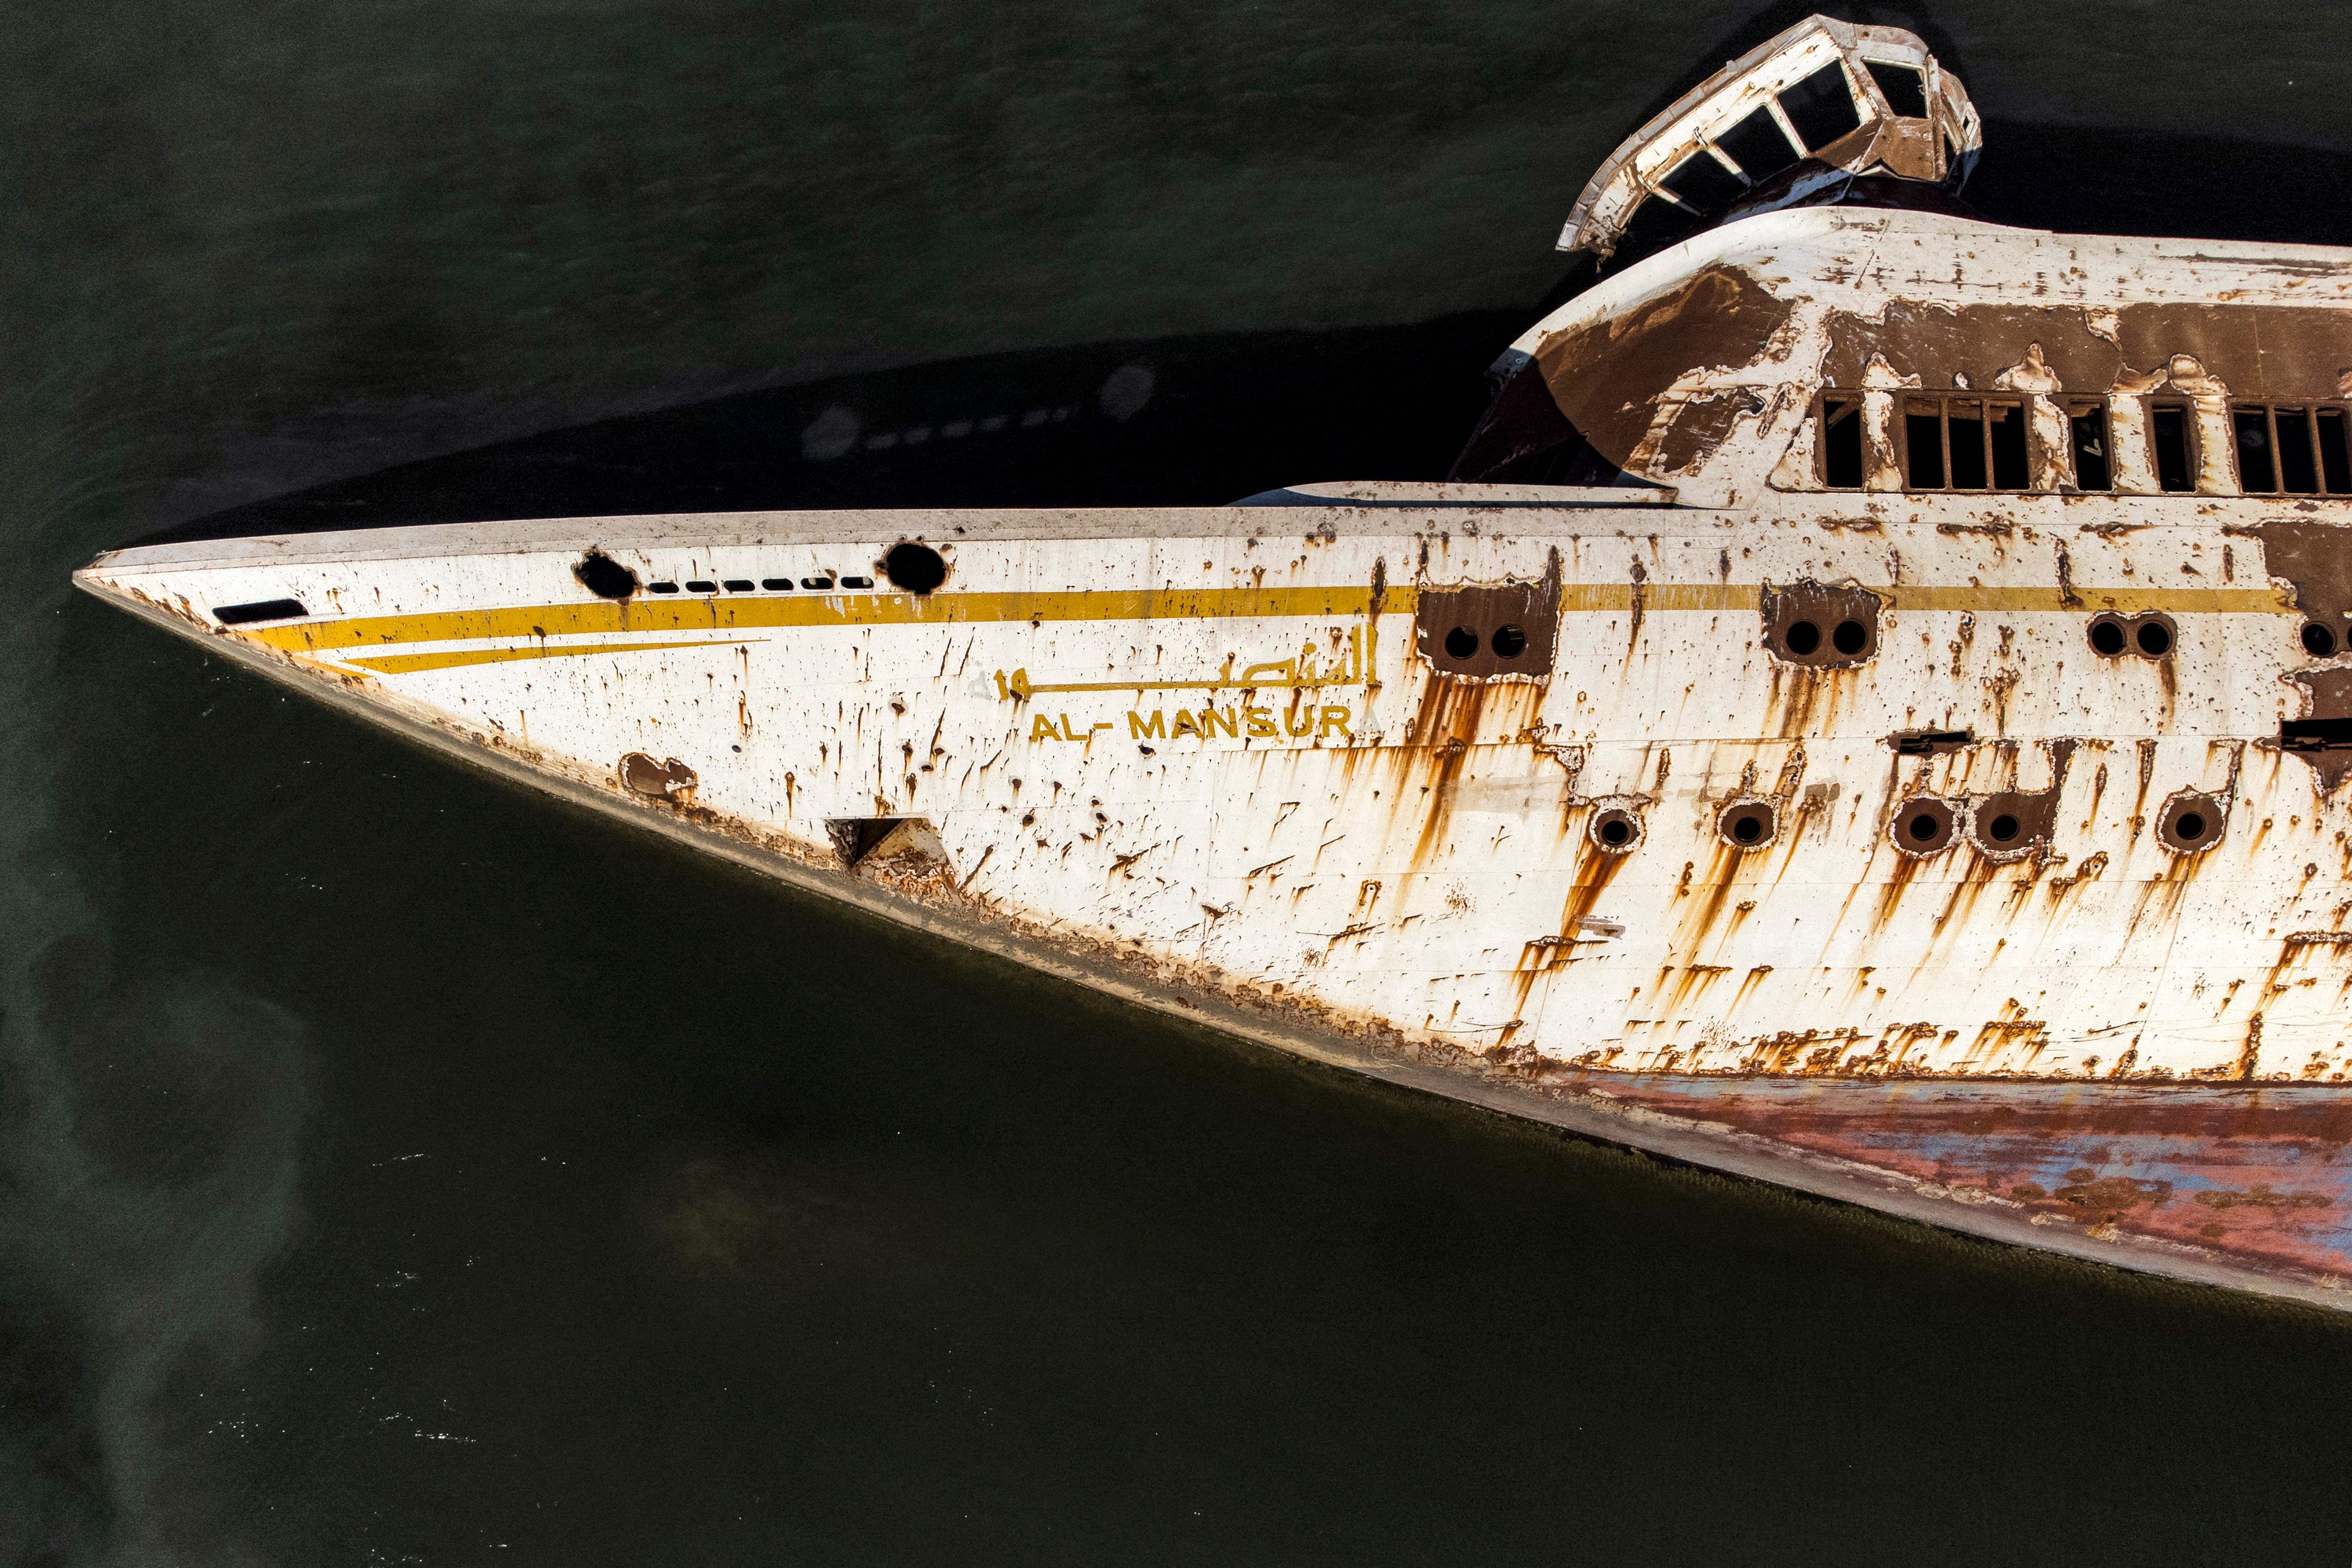 Saddam Hussein’s Capsized Yacht Is a Curious Attraction For Sightseers and Locals in Iraq